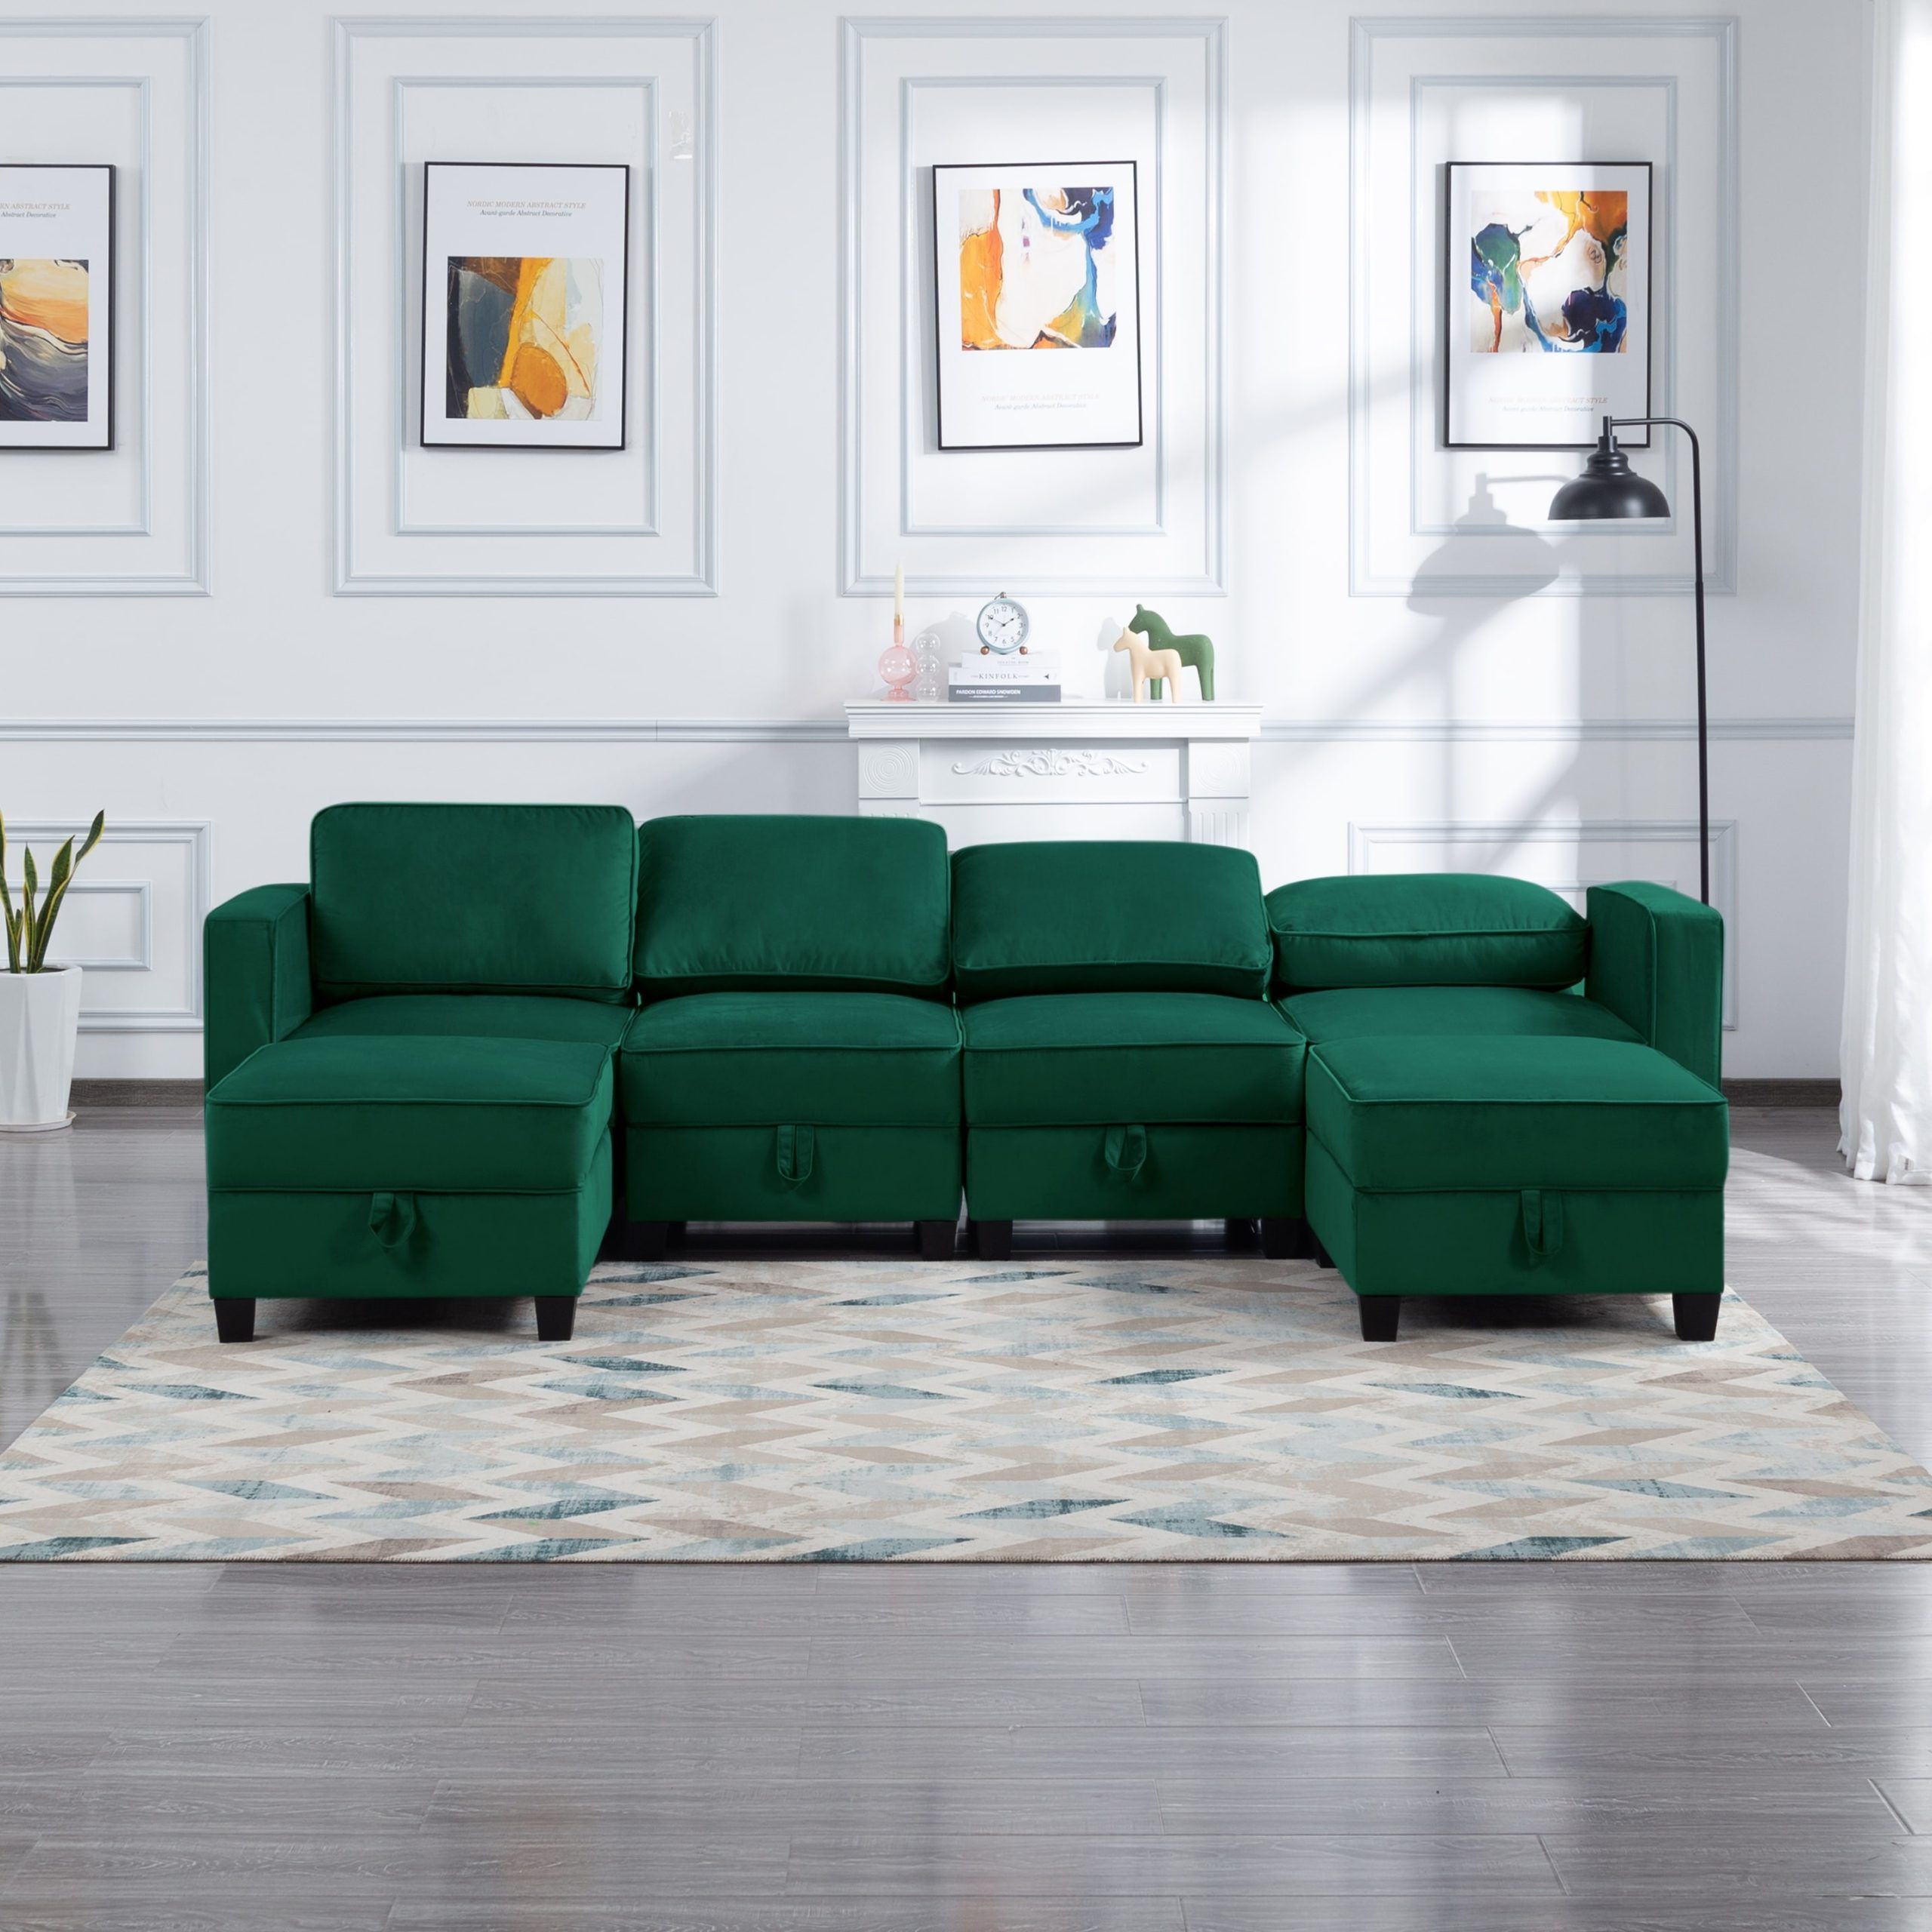 Green 116" Velvet Modular Sectional Sofa With Hidden Storage And Ottoman –  Bed Bath & Beyond – 39090598 With Regard To Green Velvet Modular Sectionals (Photo 12 of 15)